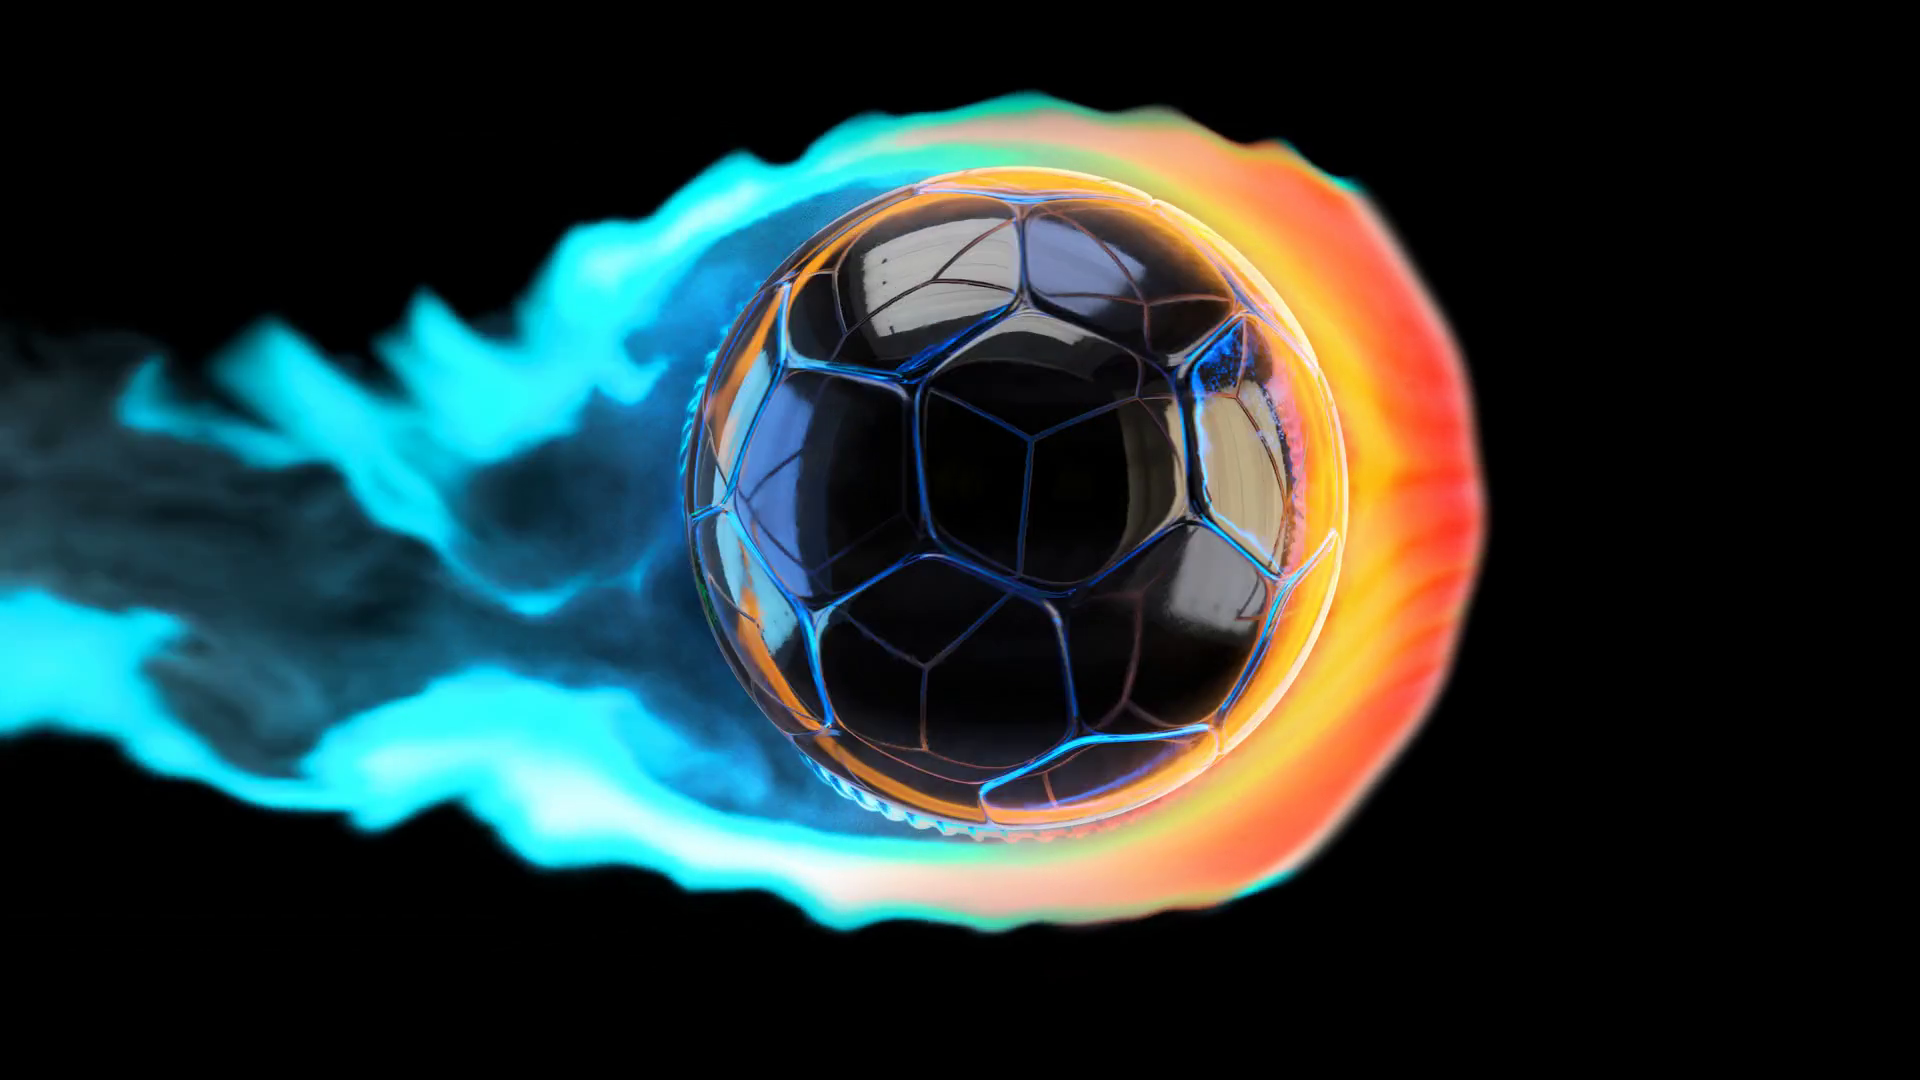 Flying soccer ball on fire on a black background Motion Background